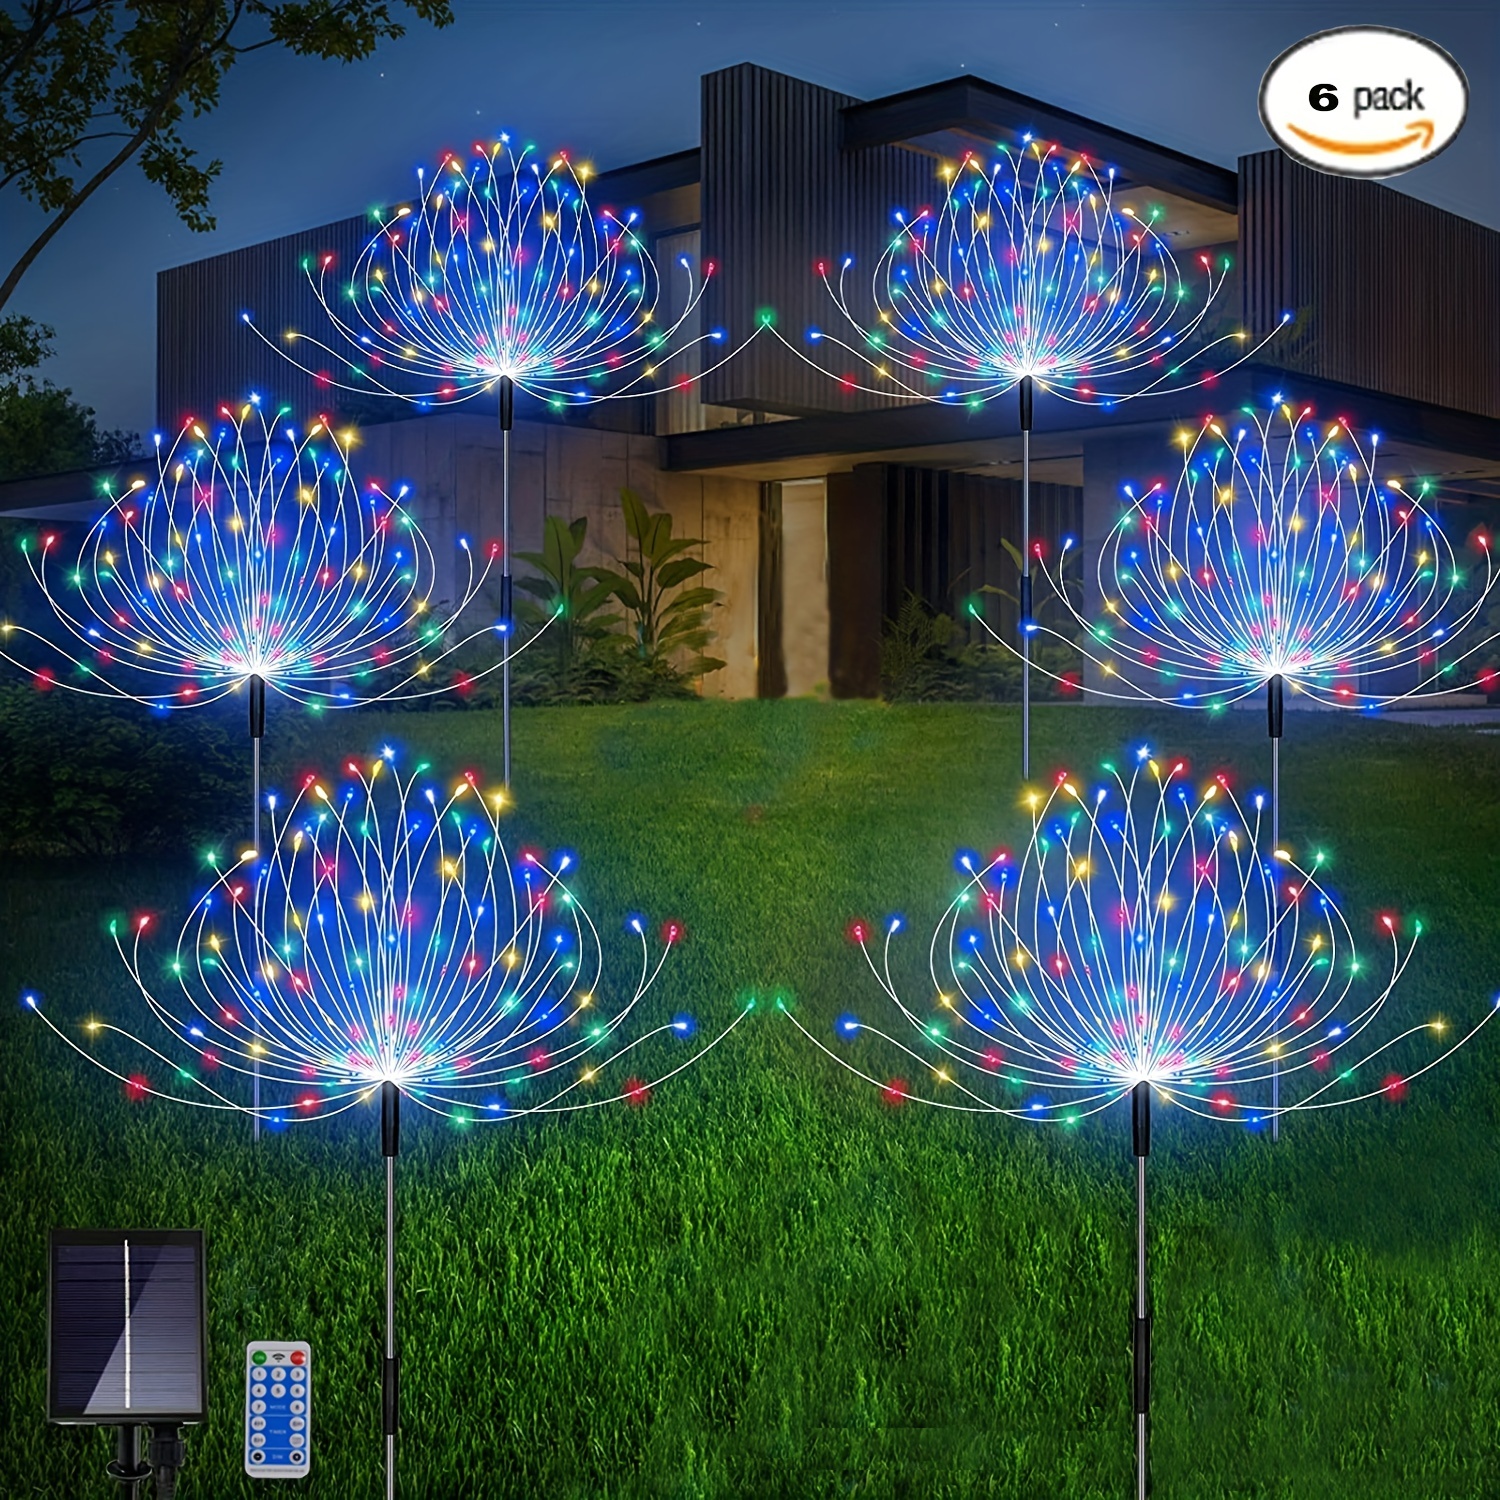 

6pcs Outdoor , 8 Kinds Of Models 120 Led Copper Wire Decorative Lights For Garden Path Lawn Decoration (color) Christmas, Halloween, Thanksgiving Day Gift Carnival Easter Gift